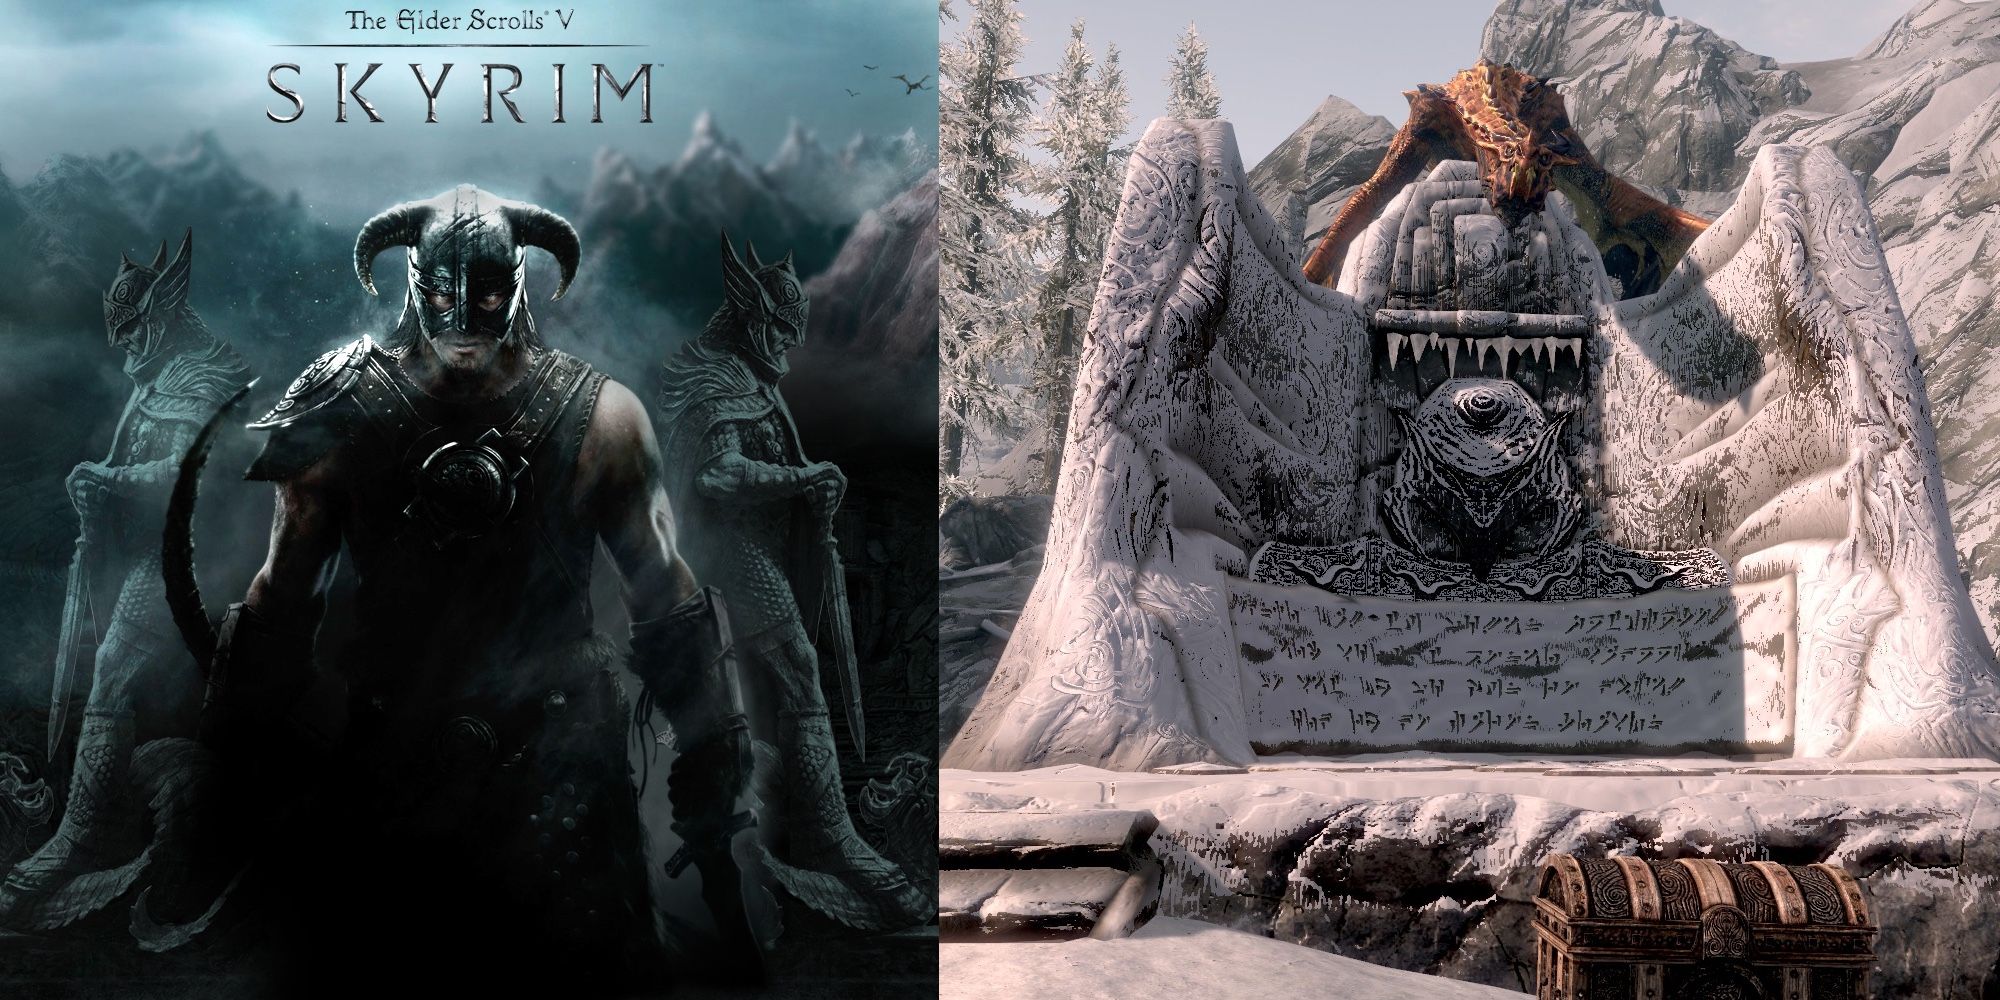 The Dragonborn from The Elder Scrolls V: Skyrim next to a Word Wall.